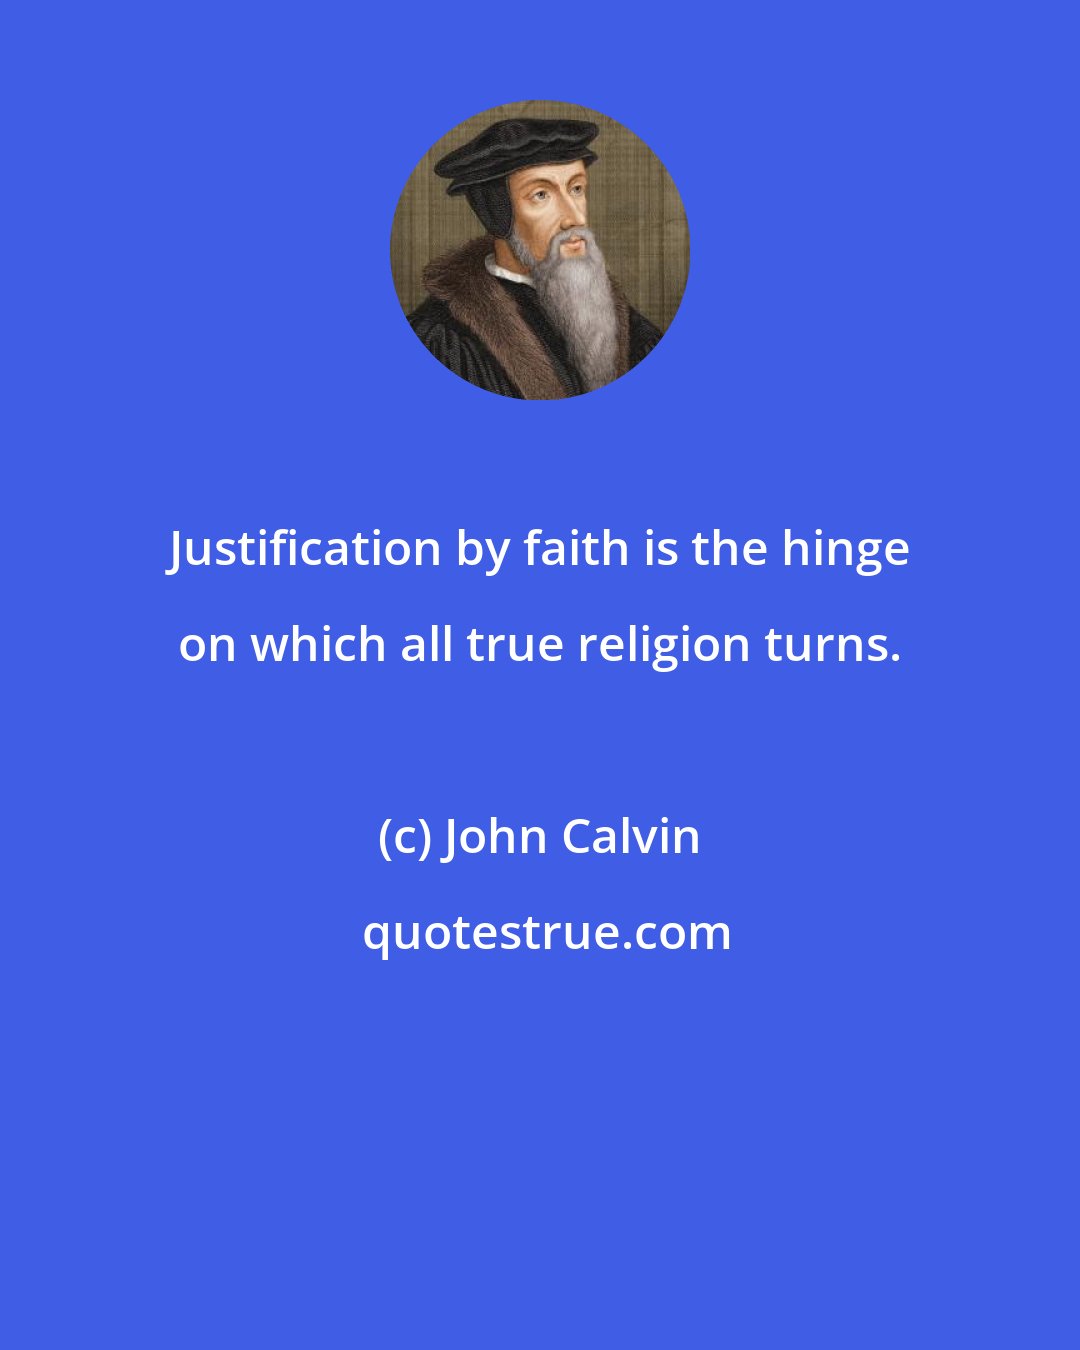 John Calvin: Justification by faith is the hinge on which all true religion turns.